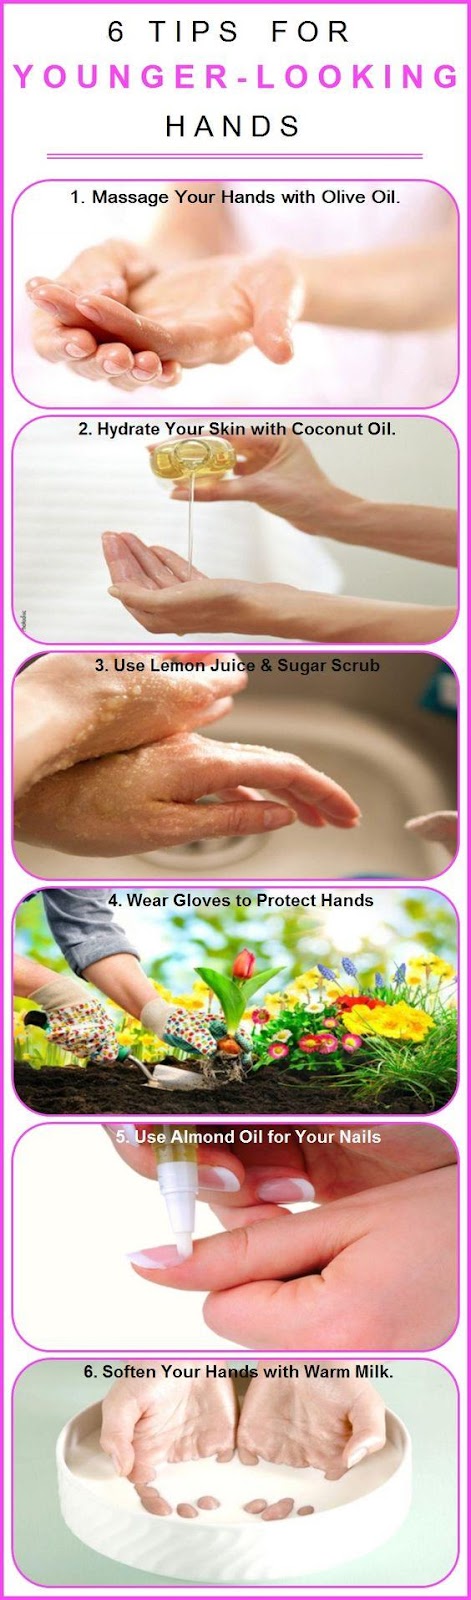 These 6 Tips Will Make Your Hands Look Younger [INFOGRAPHIC] #infographic #hands #tips